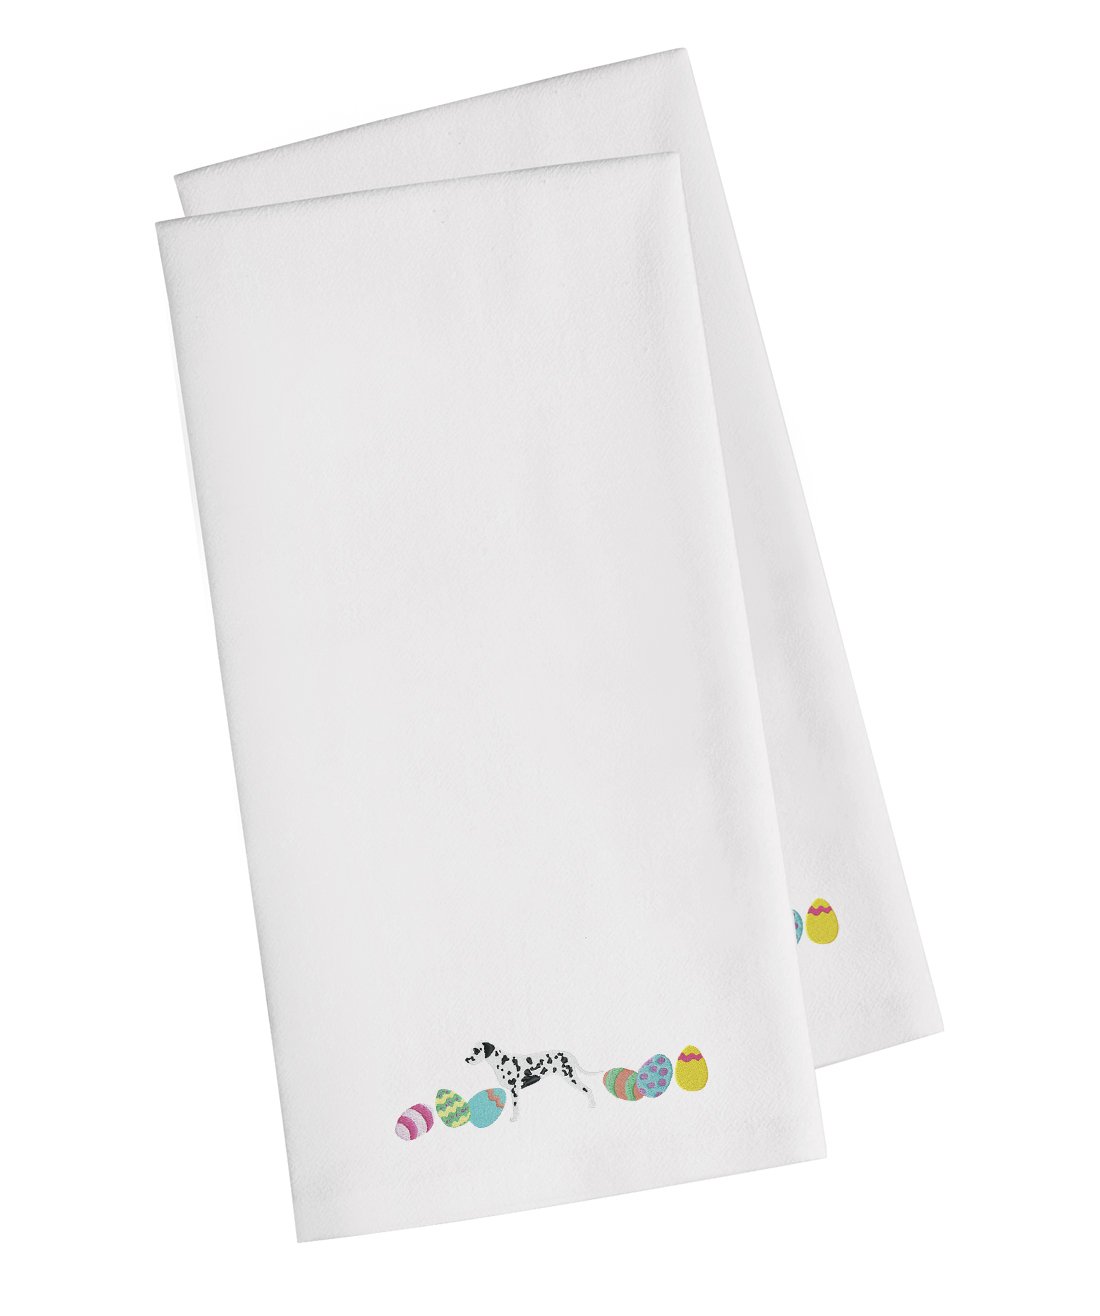 Dalmatian Easter White Embroidered Kitchen Towel Set of 2 CK1632WHTWE by Caroline's Treasures